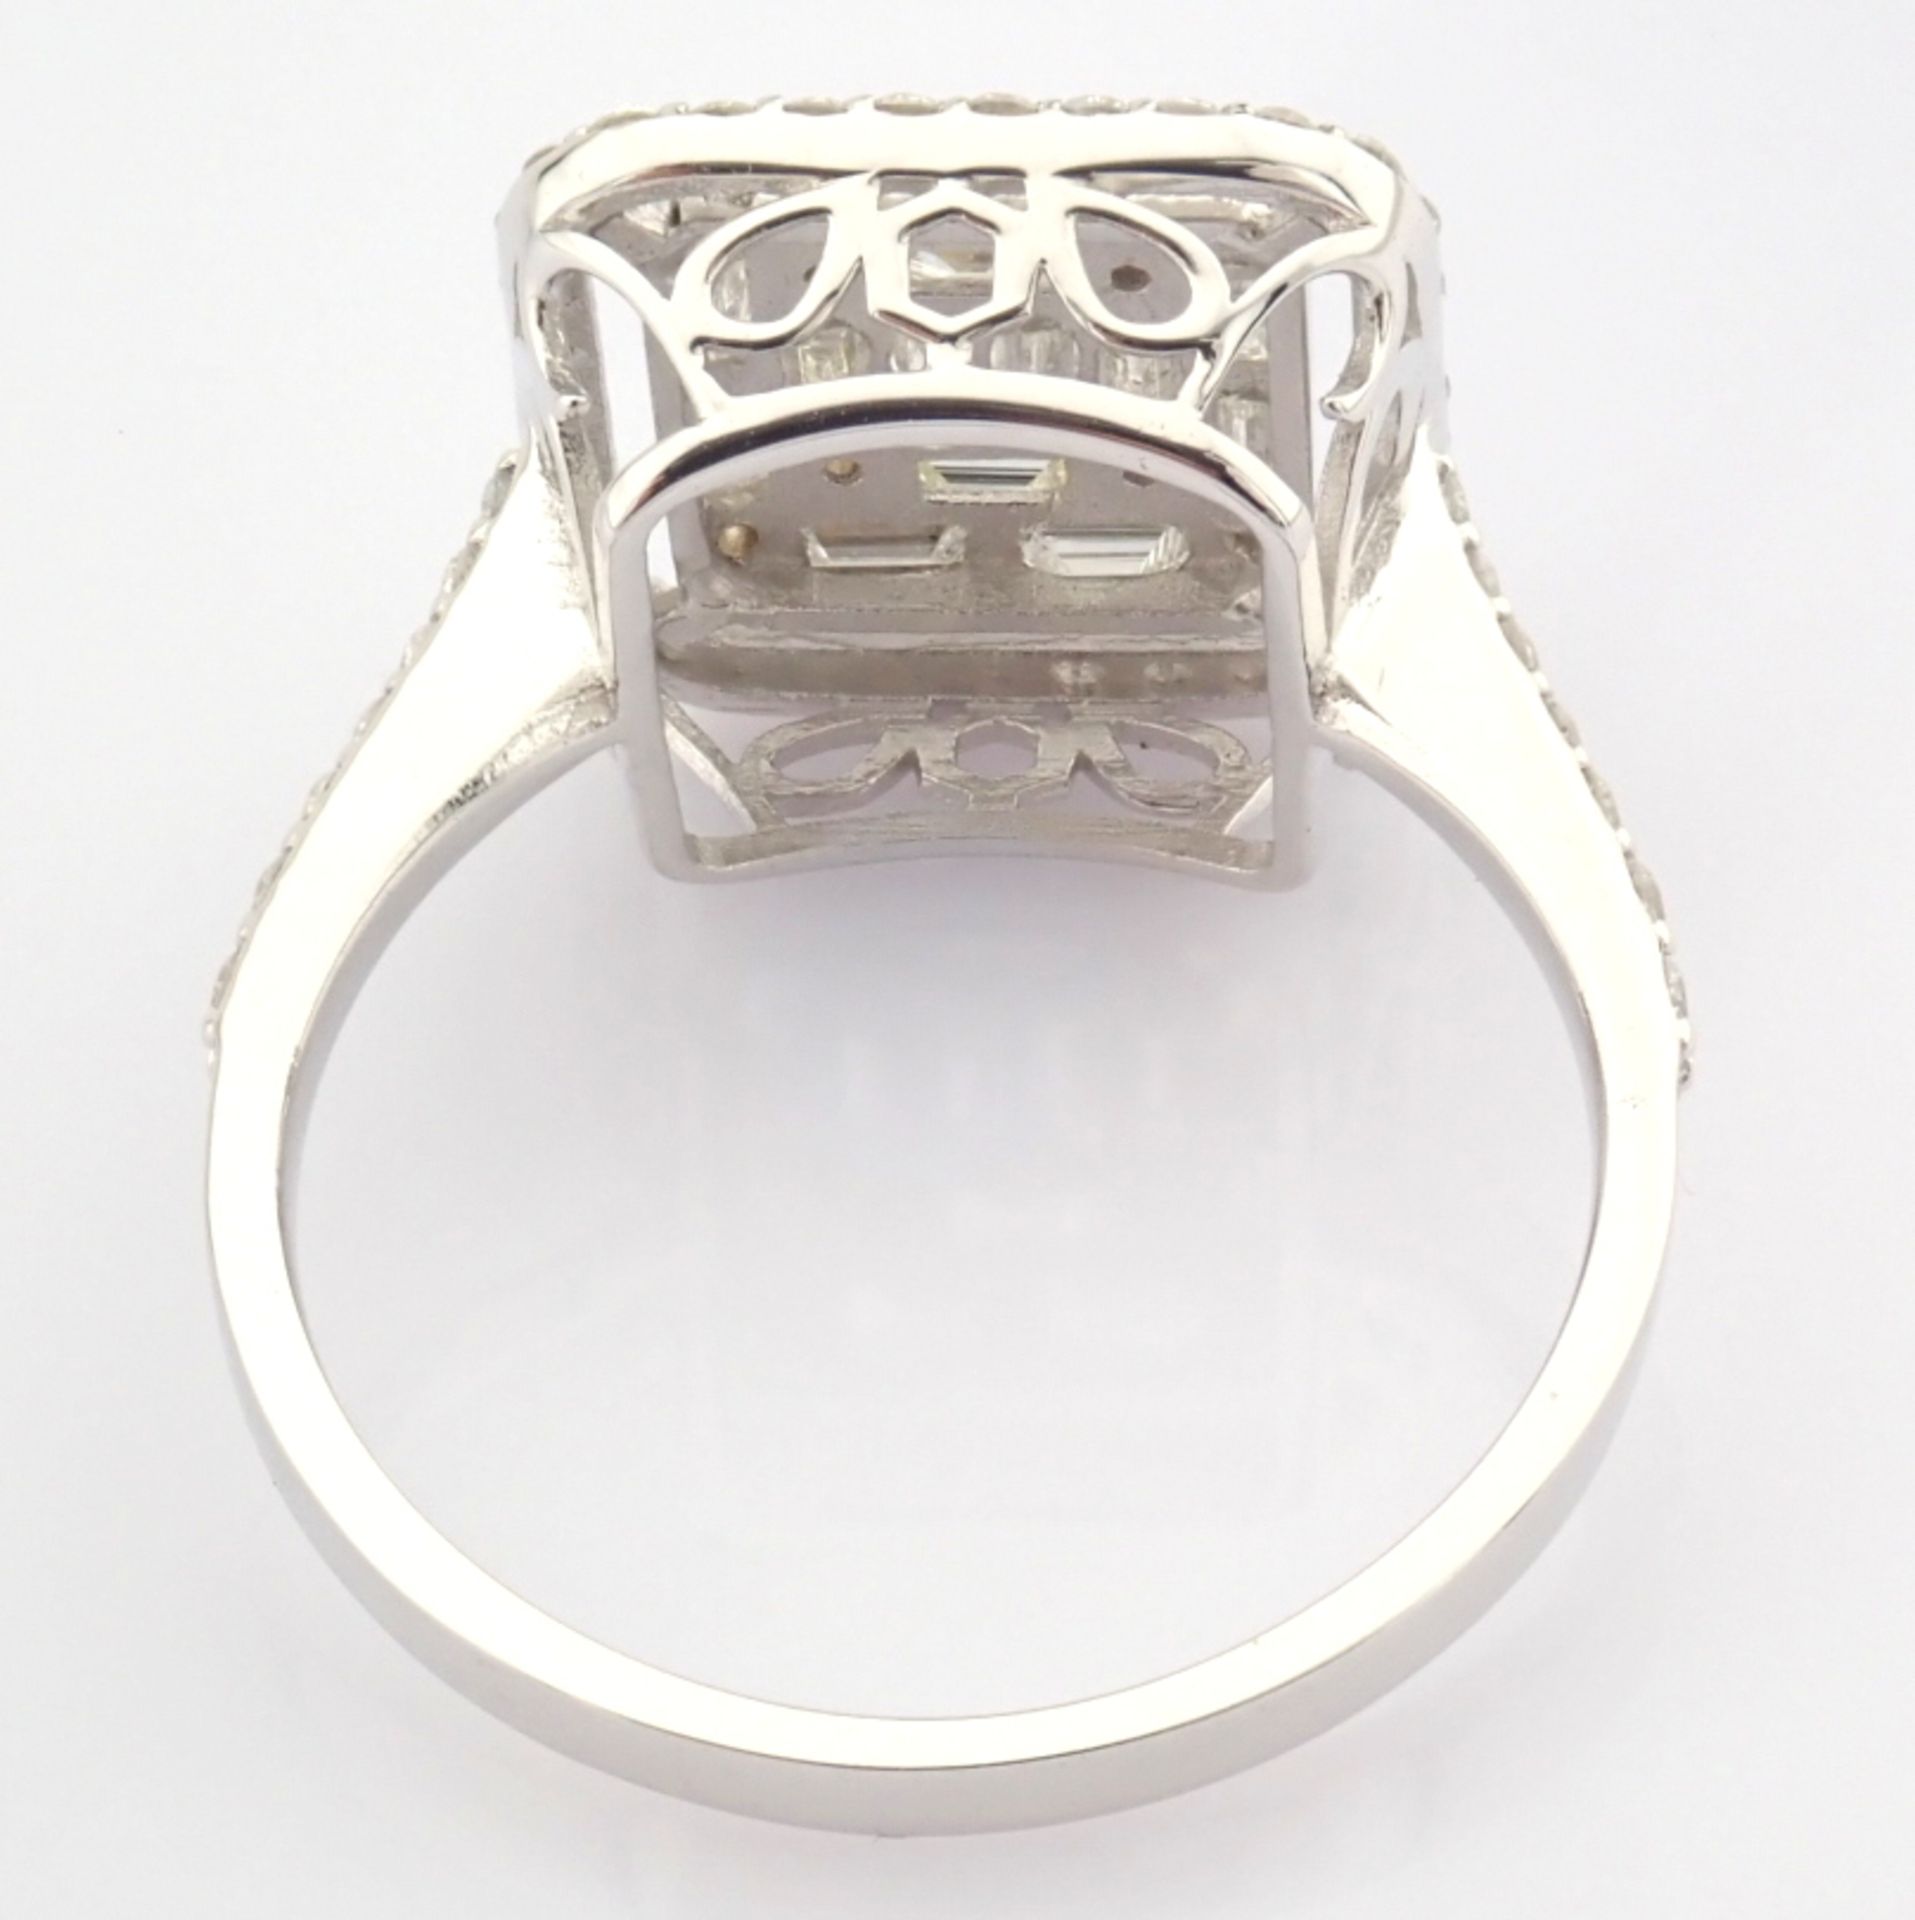 Certificated 14K White Gold Diamond Ring / Total 0.99 ct - Image 5 of 5